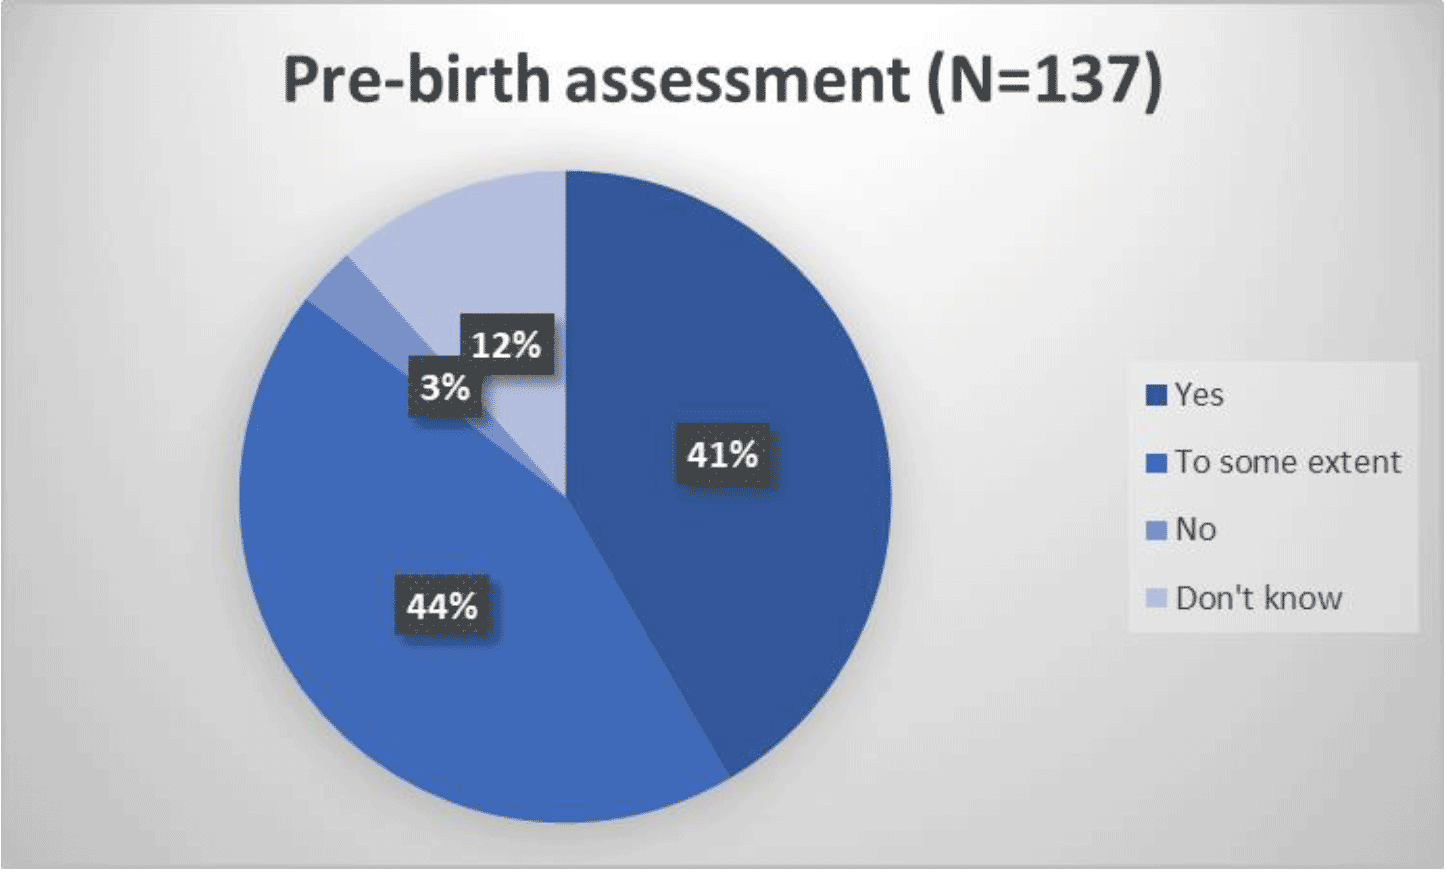 Pie chart showing whether respondents felt the pre-birth assessment and support sections clearly set out the context and processes:
Yes 41%
To some extent 44%
No 3%
Don't know 12%